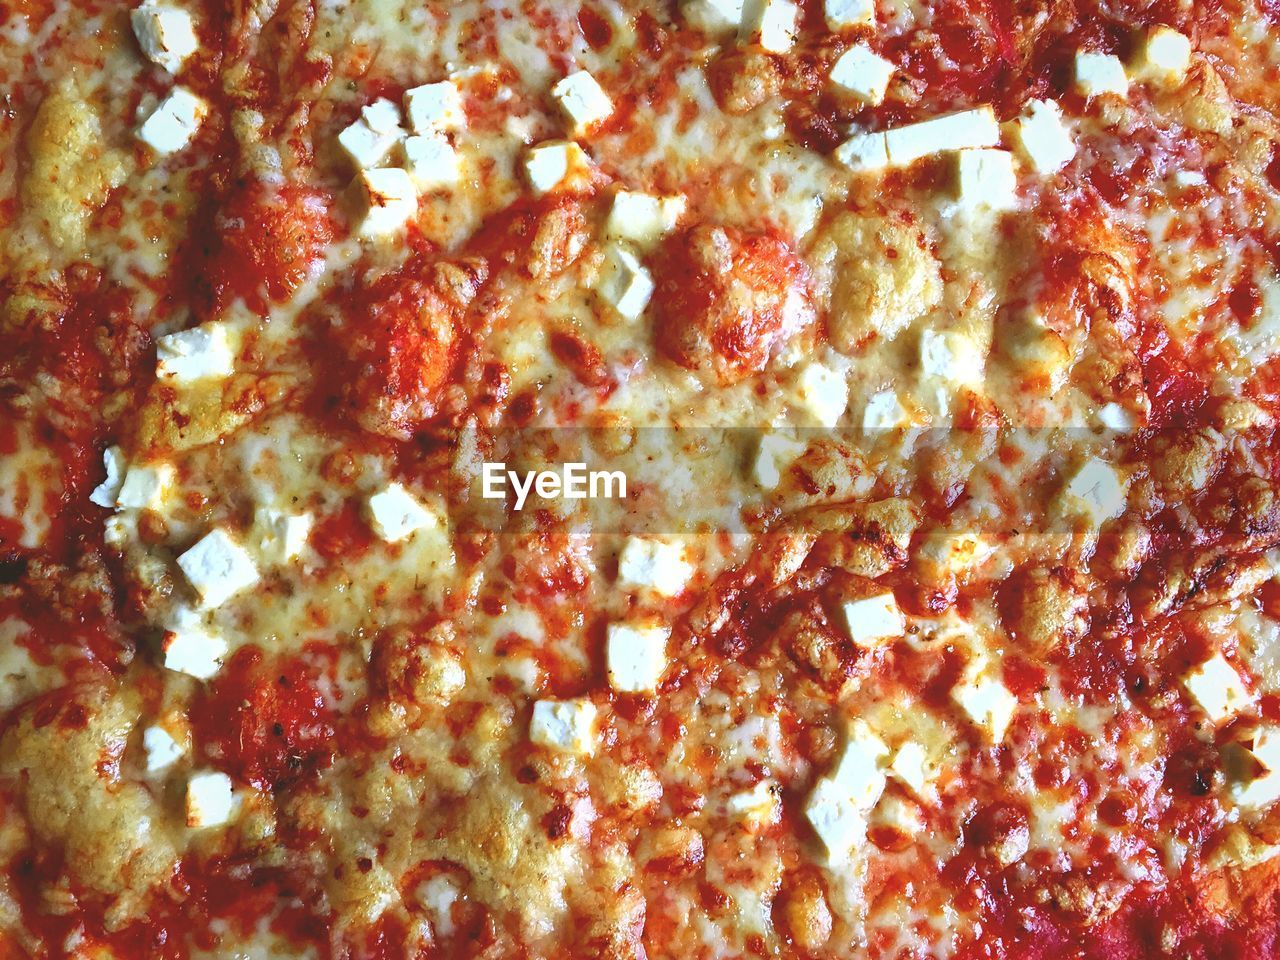 Full frame close-up of pizza